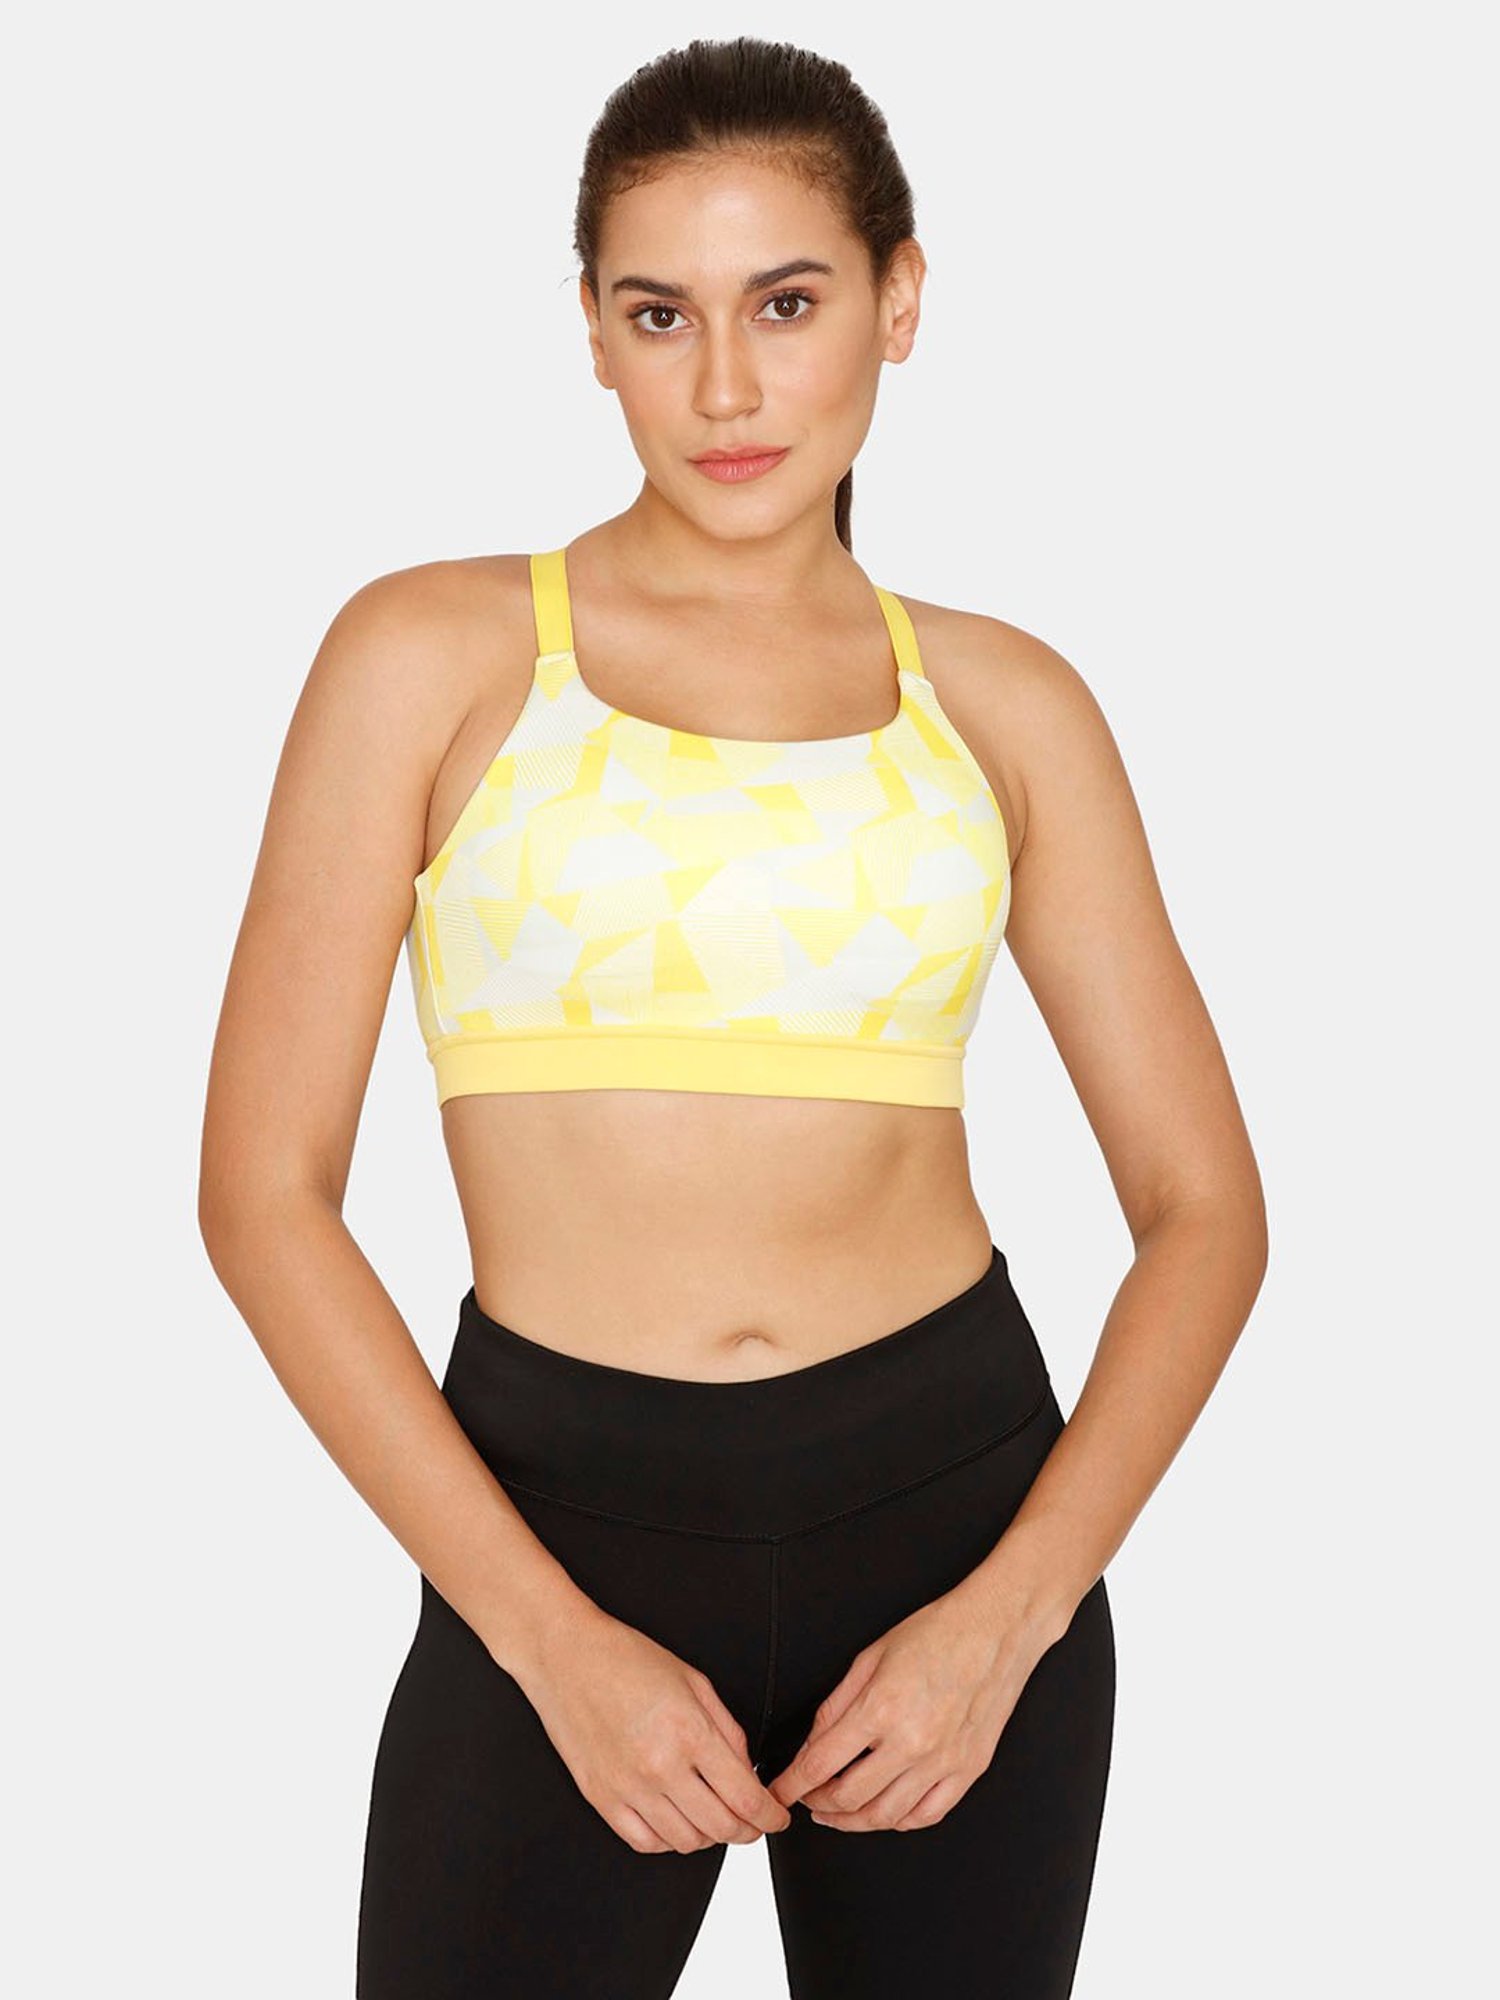 Buy Zelocity by Zivame Blue Printed Sports Bra for Women's Online @ Tata  CLiQ